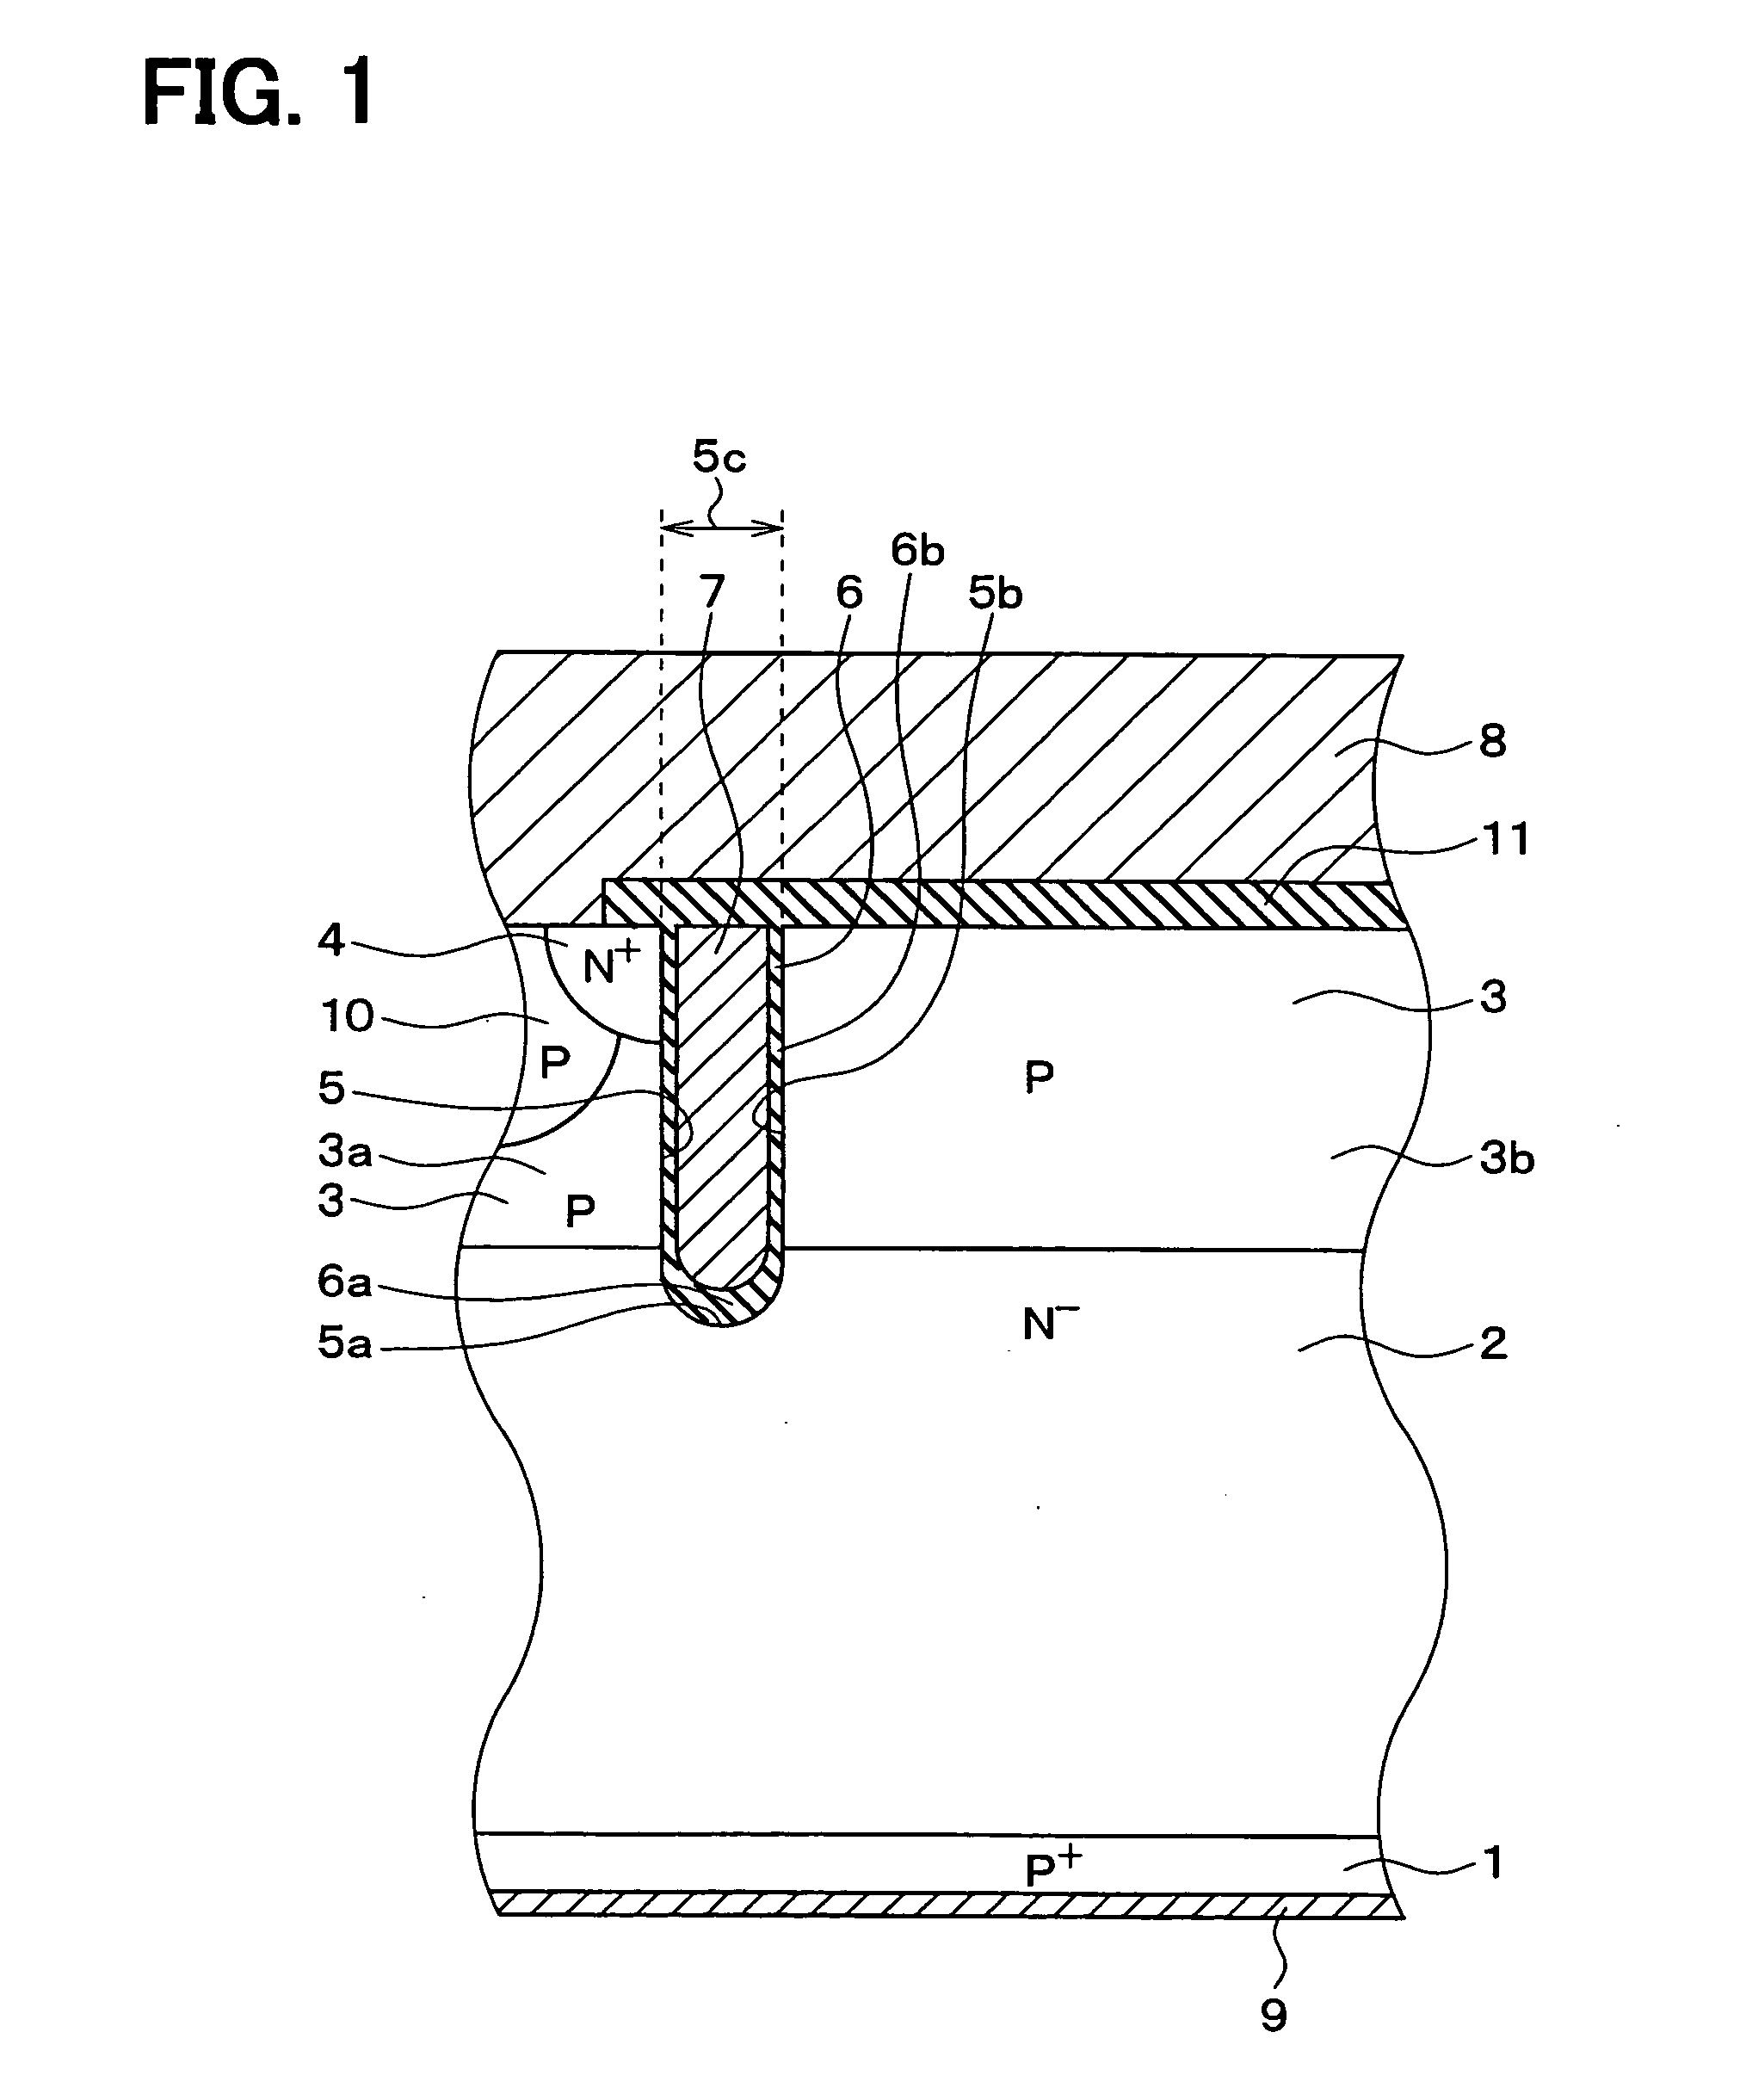 Trench gate type semiconductor device